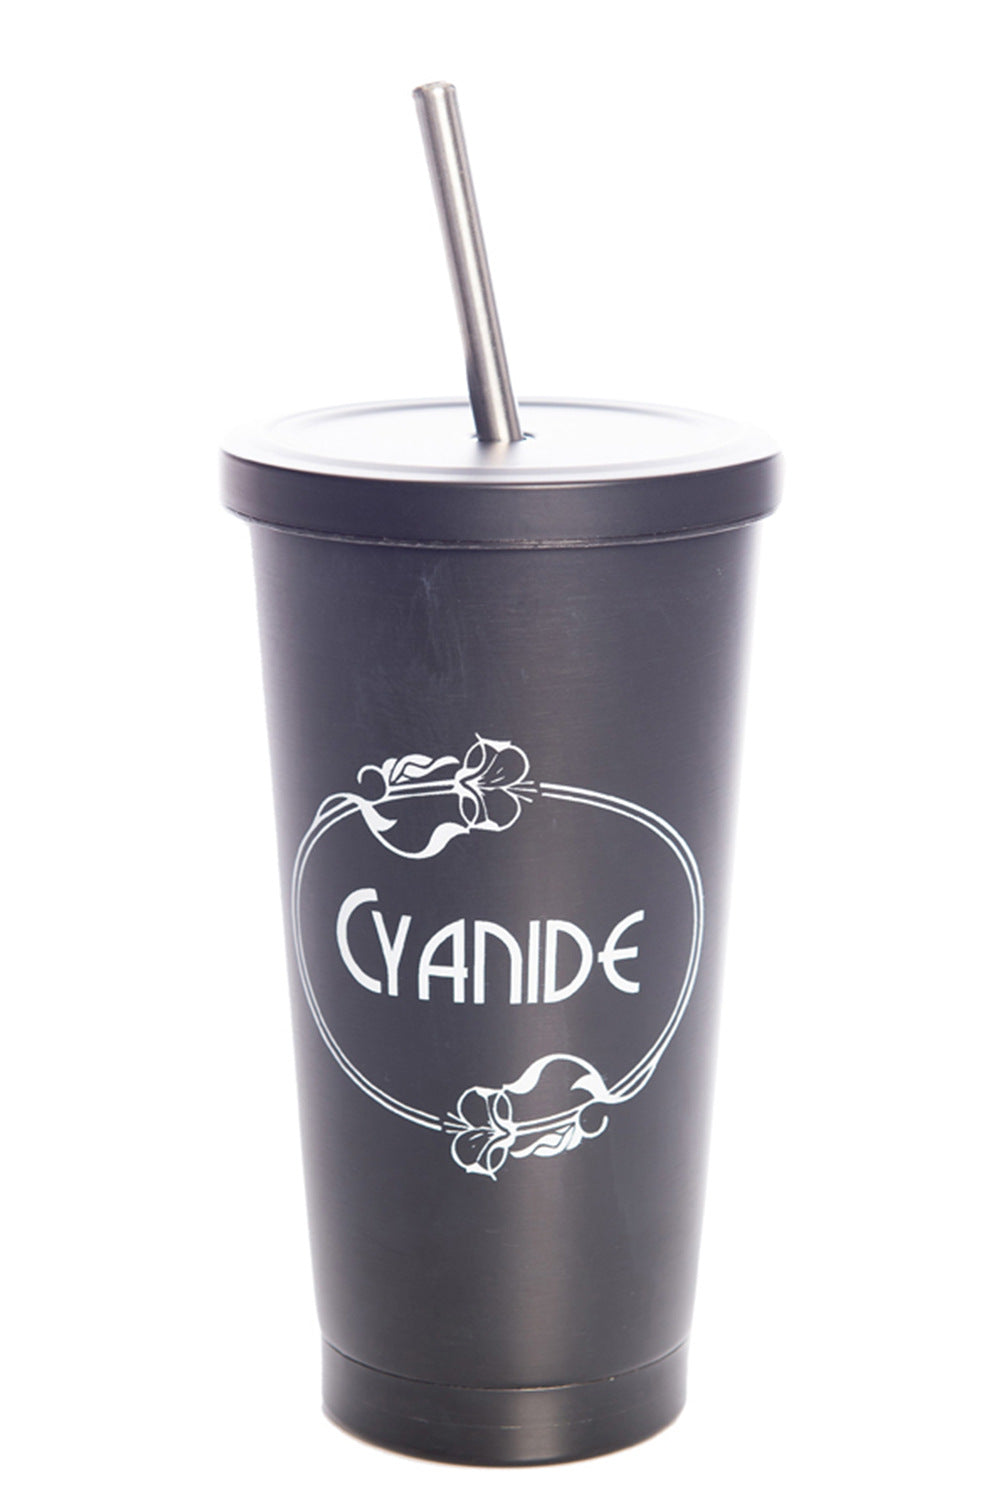 Reusable cup and straw in black with Cyanide detail